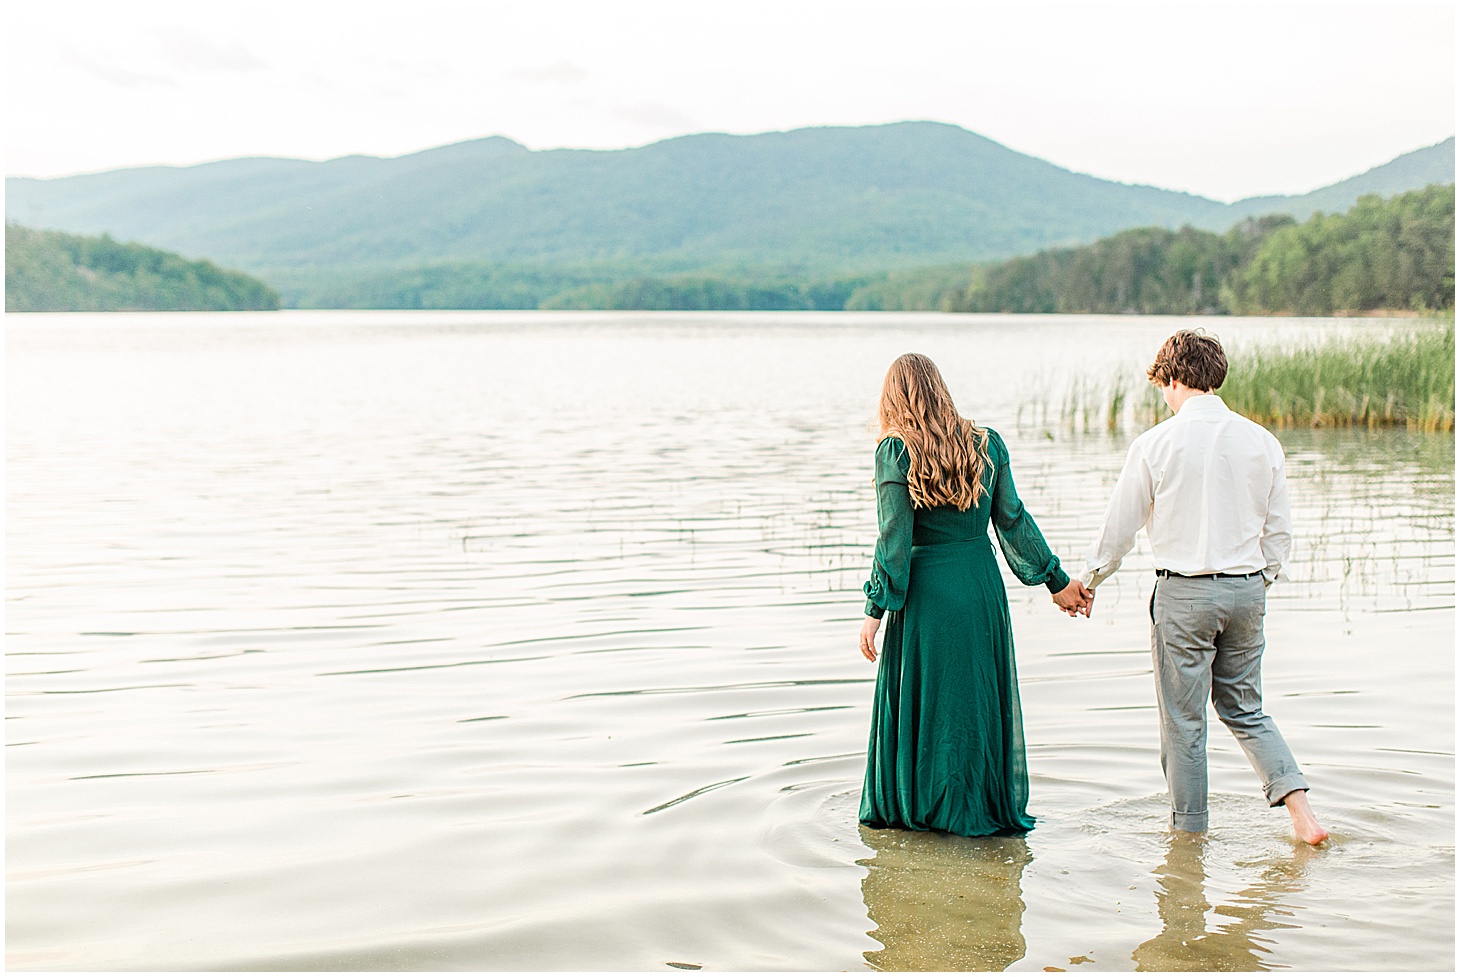 carvinscoveengagementsession_roanokeengagementsession_carvinscove_virginiawedding_virginiaweddingphotographer_vaweddingphotographer_photo_0054.jpg